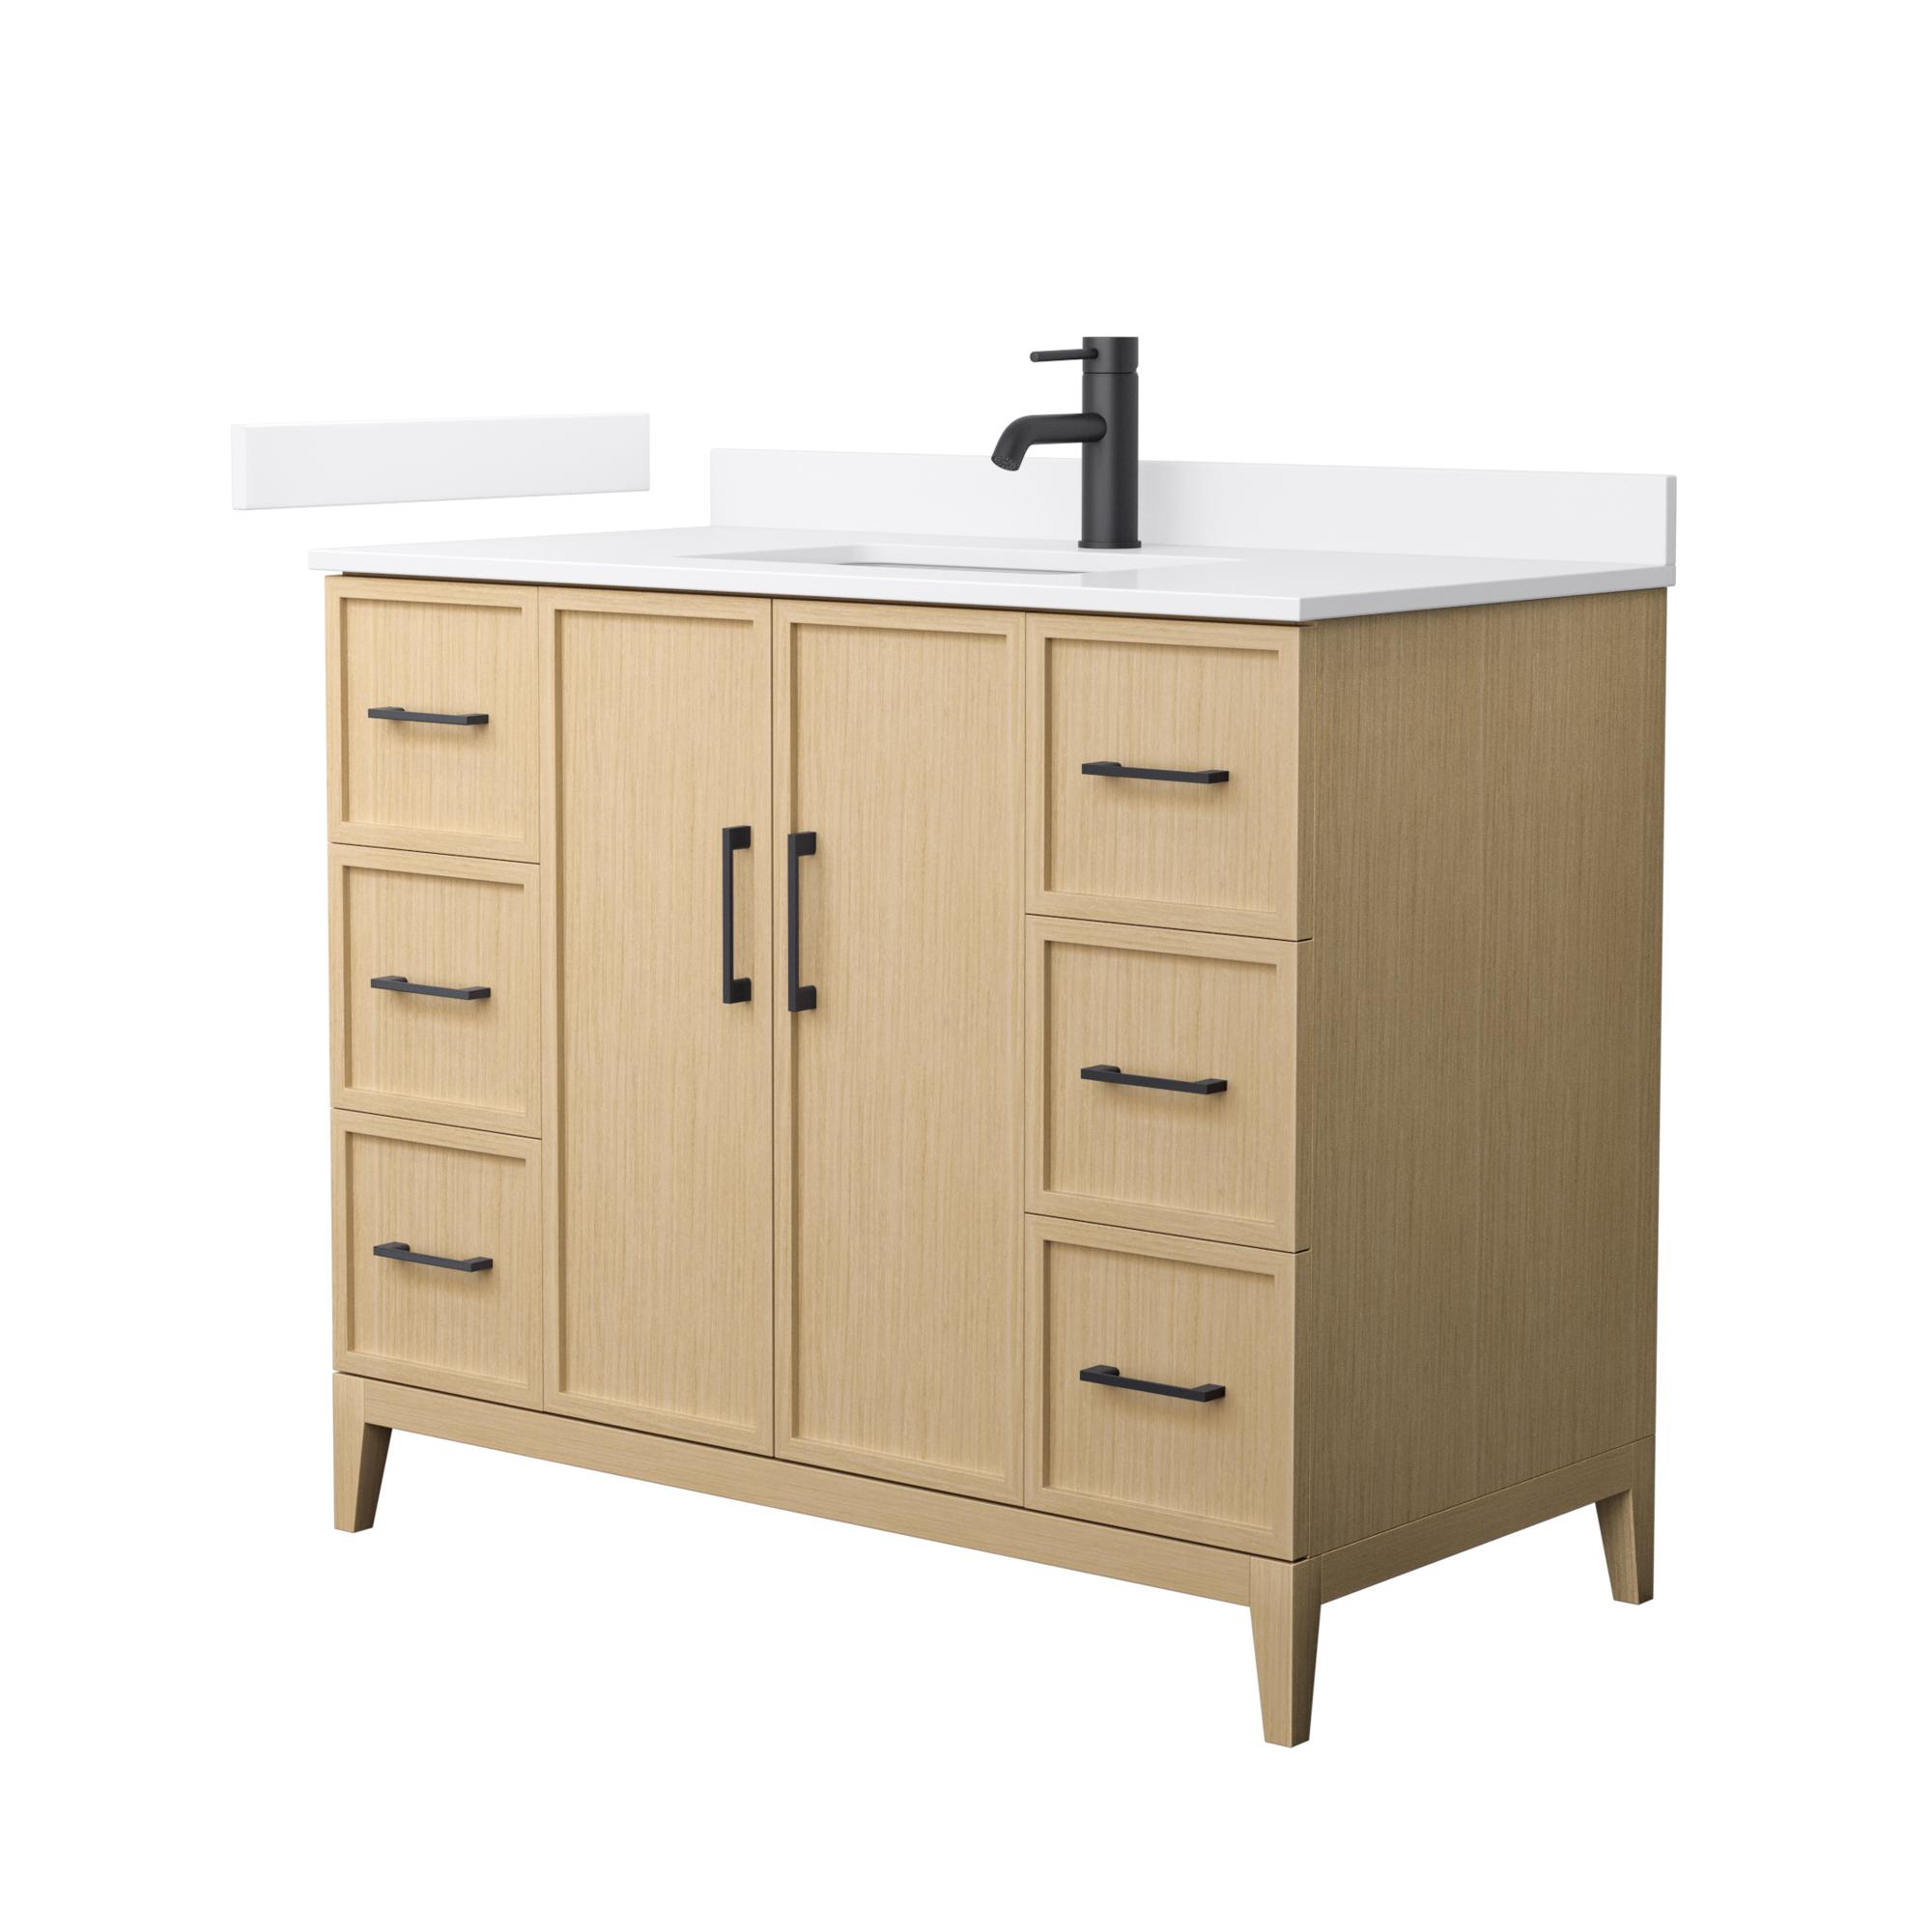 42" Transitional Single Vanity Base in White, 7 Top Options with 2 Hardware Option